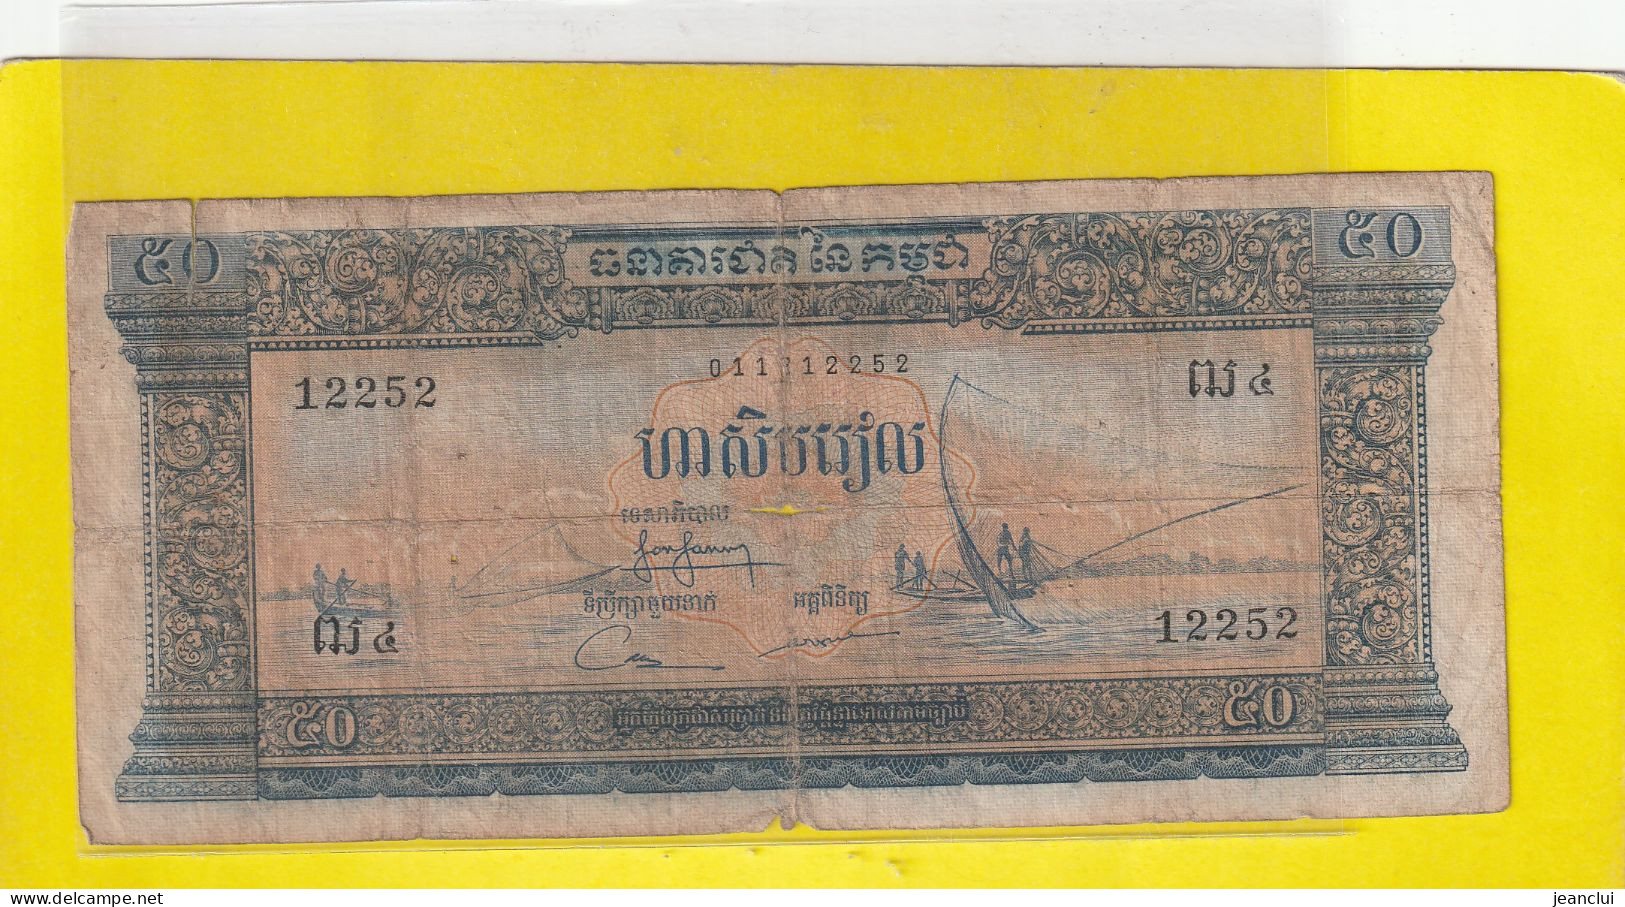 BANQUE NATIONALE DU CAMBODGE  .  50 RIELS    . N°  12252  ( 5 NUMBERS )  .  BILLET USITE  .  2 SCANNES - Cambogia